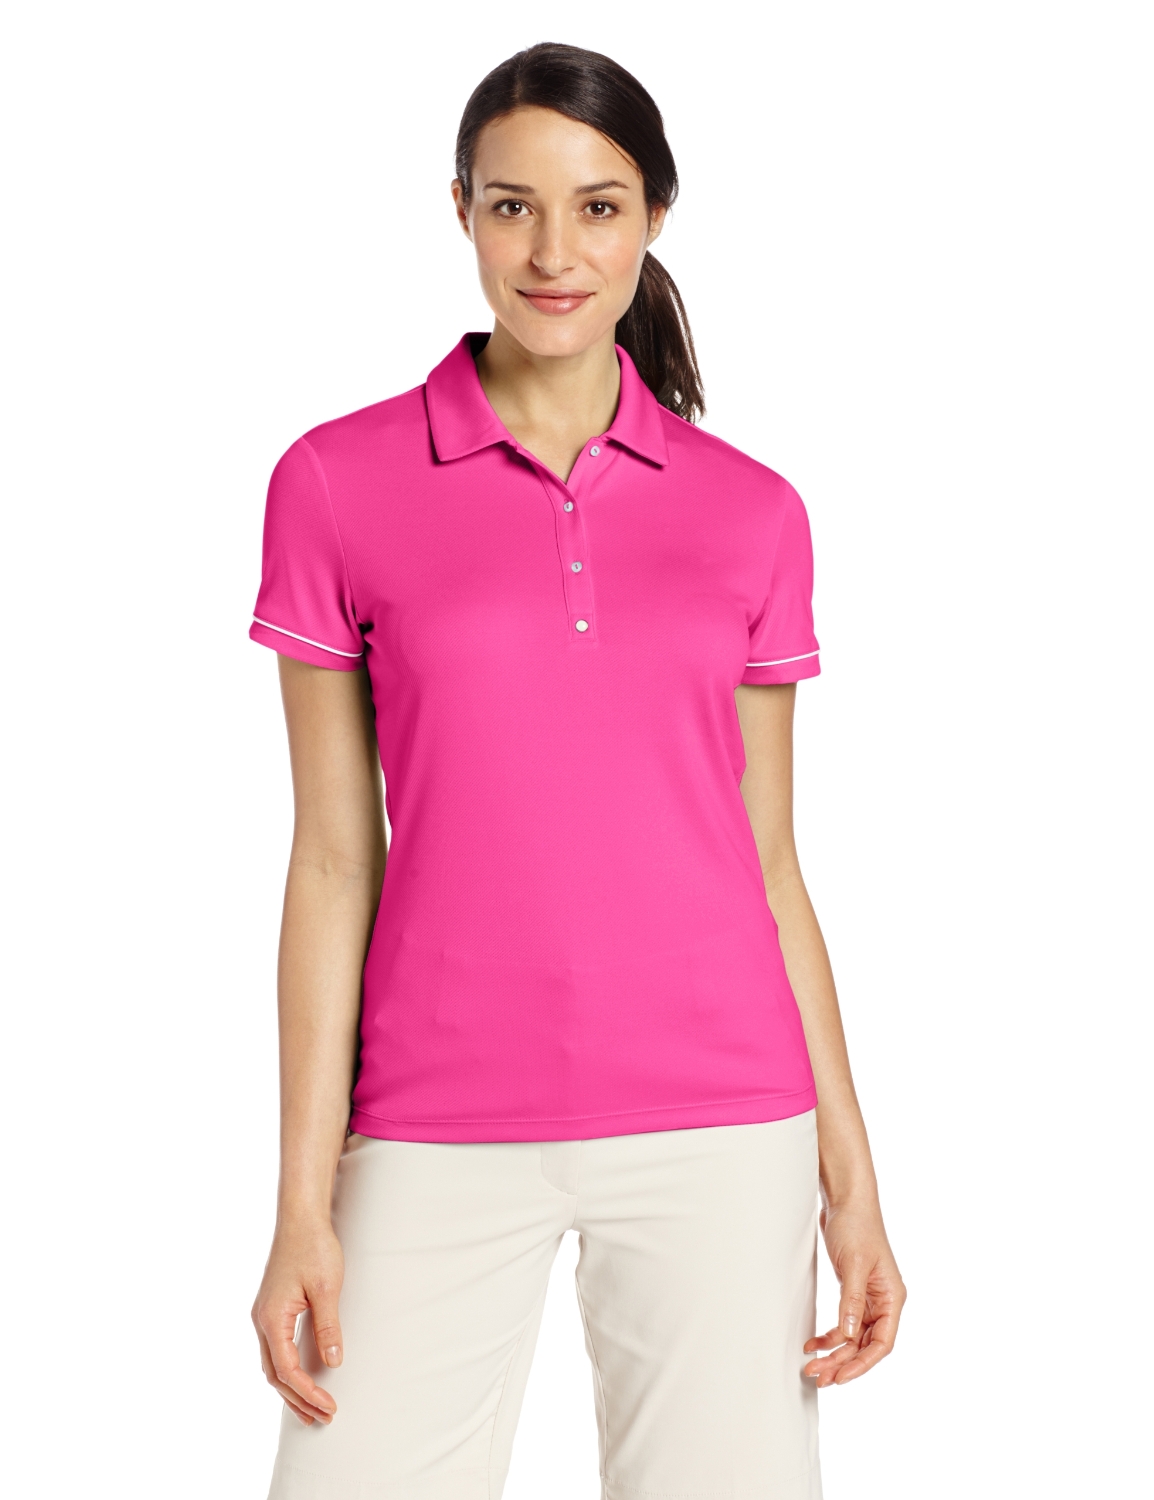 Womens Golf Shirts Collection